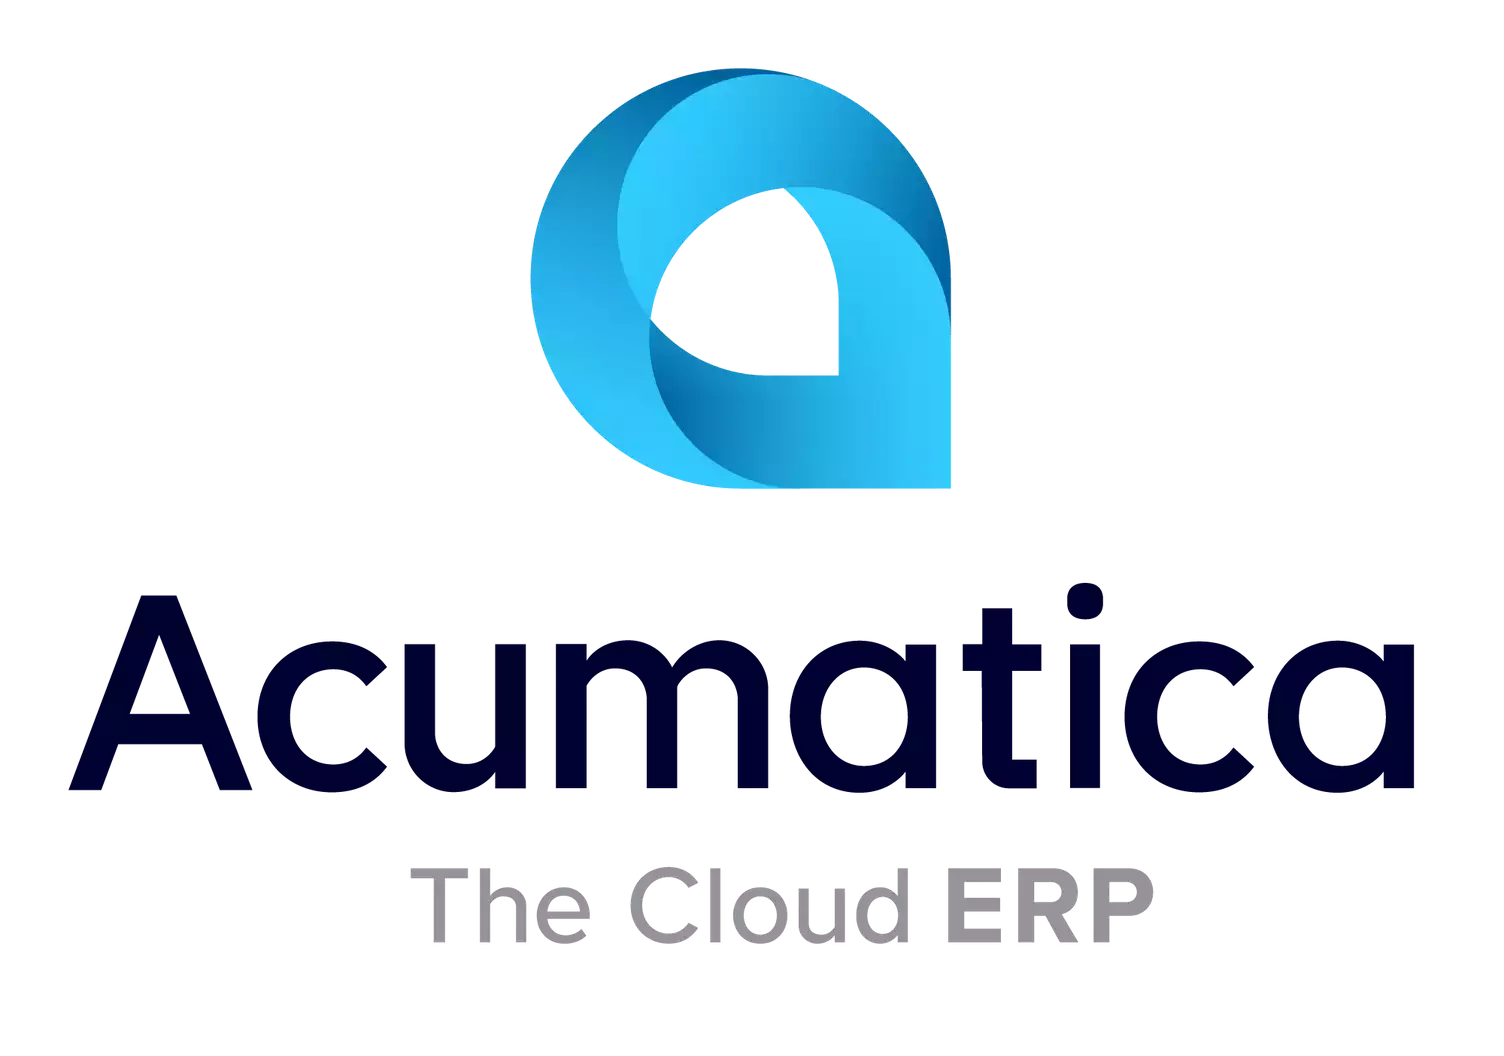 The Acumatica logo. Integrate your mobile forms with Acumatic and instantly update or create Acumatica records based on collected data, dispatch forms pre-populated with Acumatica data, and more.